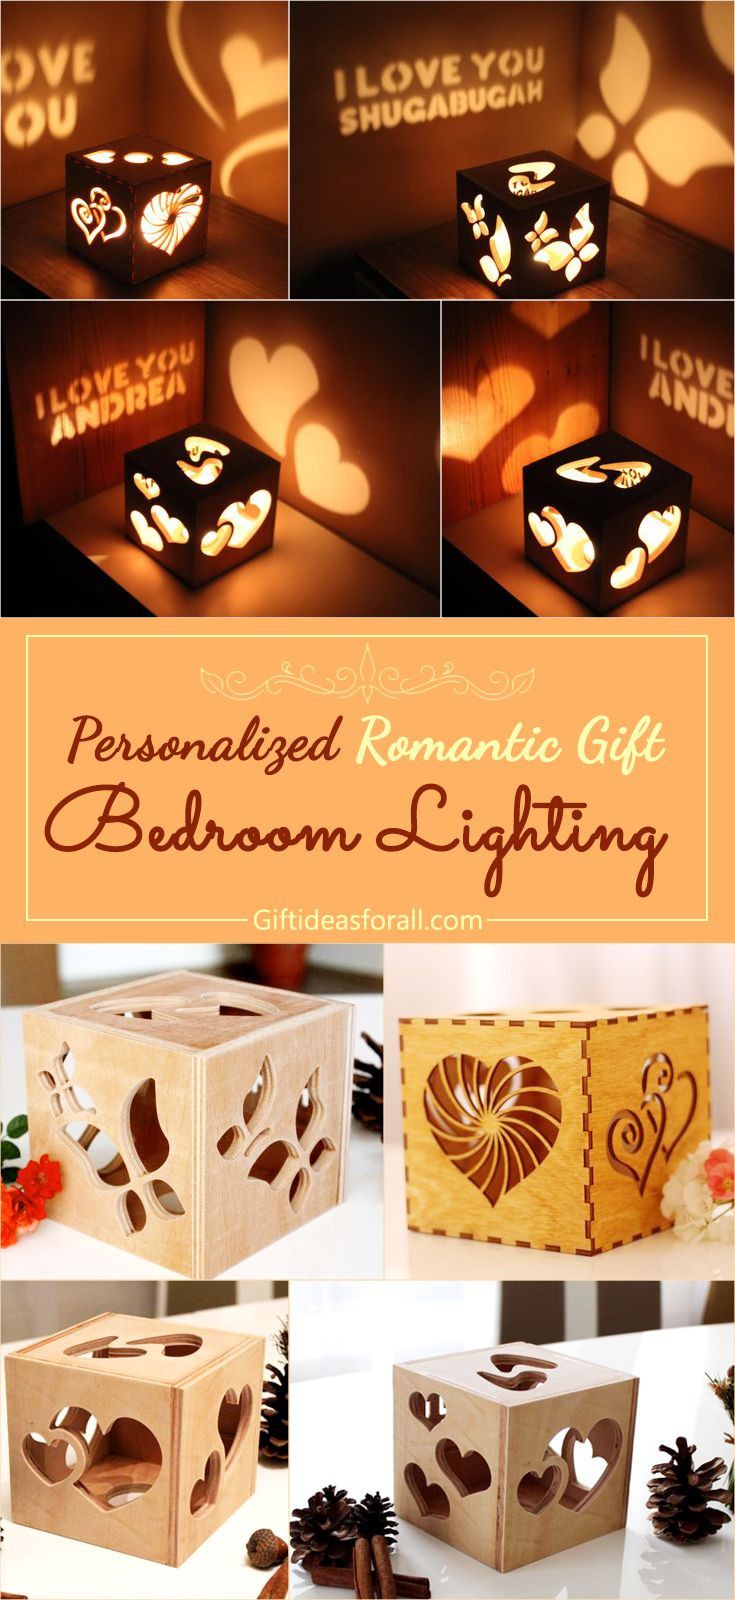 Fun Gift Ideas For Girlfriends
 Personalized romantic bedroom lighting Gifts Giftideas